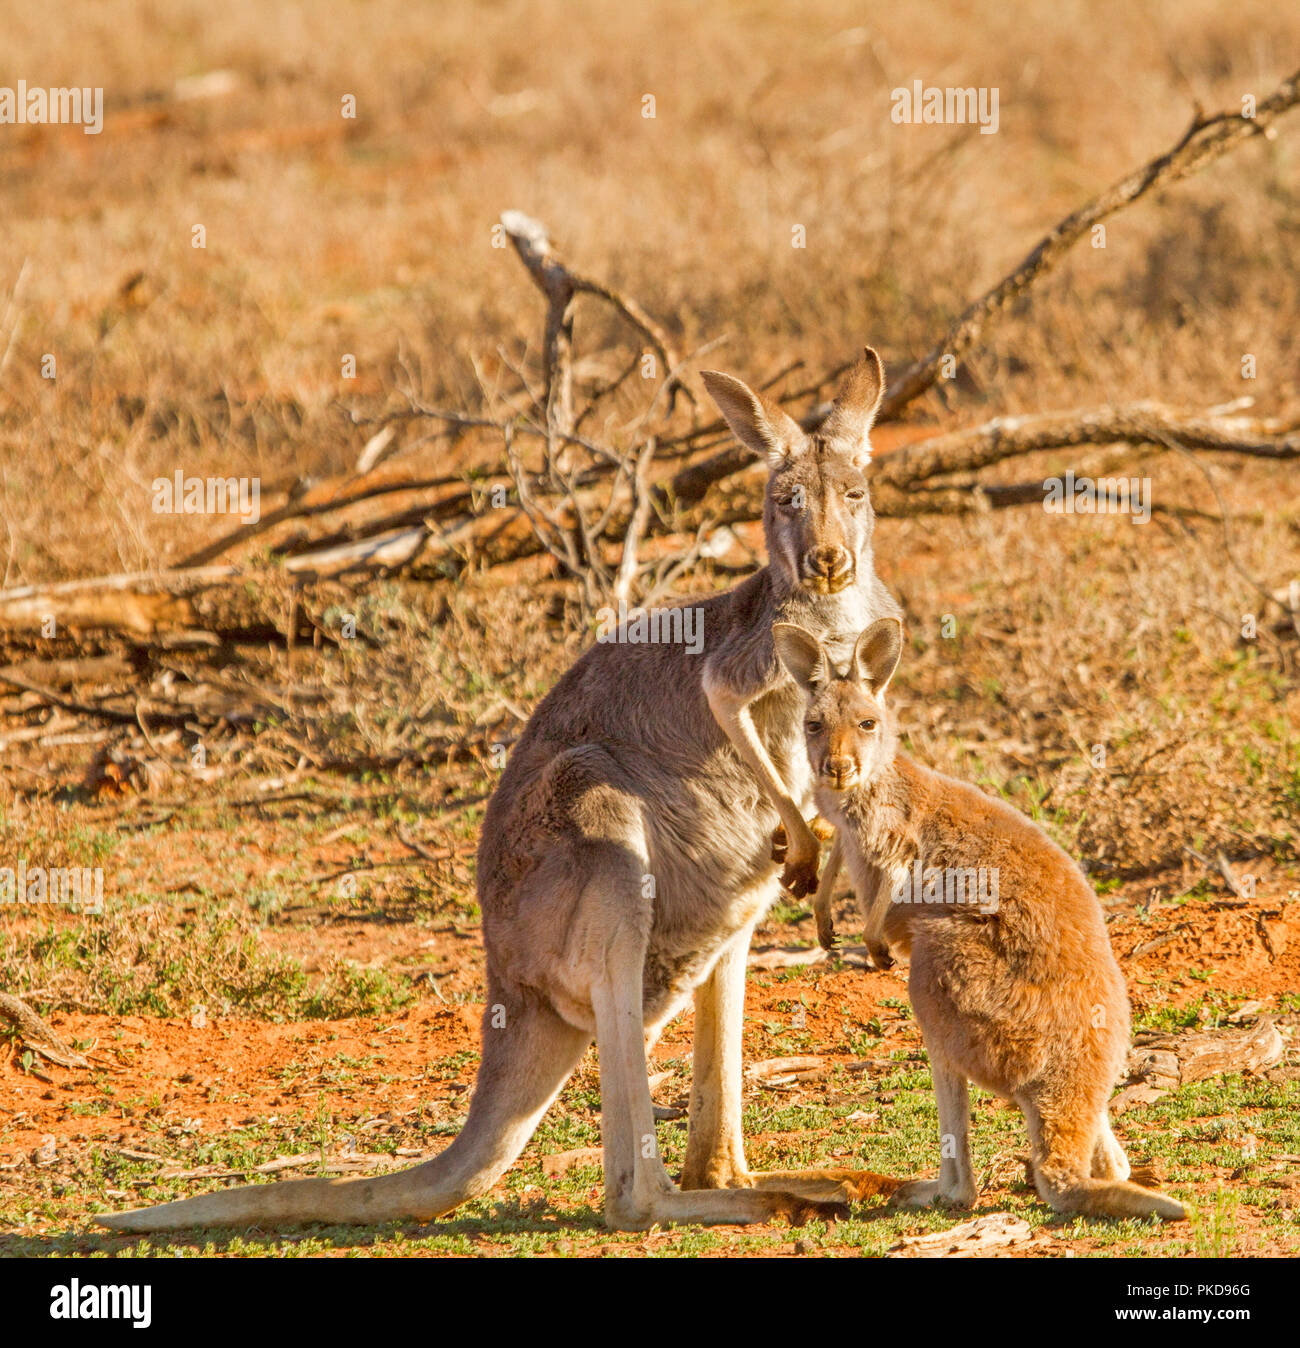 Red kangaroos in outback Austra, female with large red joey with vivid red fur, both staring at camera, against background of red soil and dry grass Stock Photo